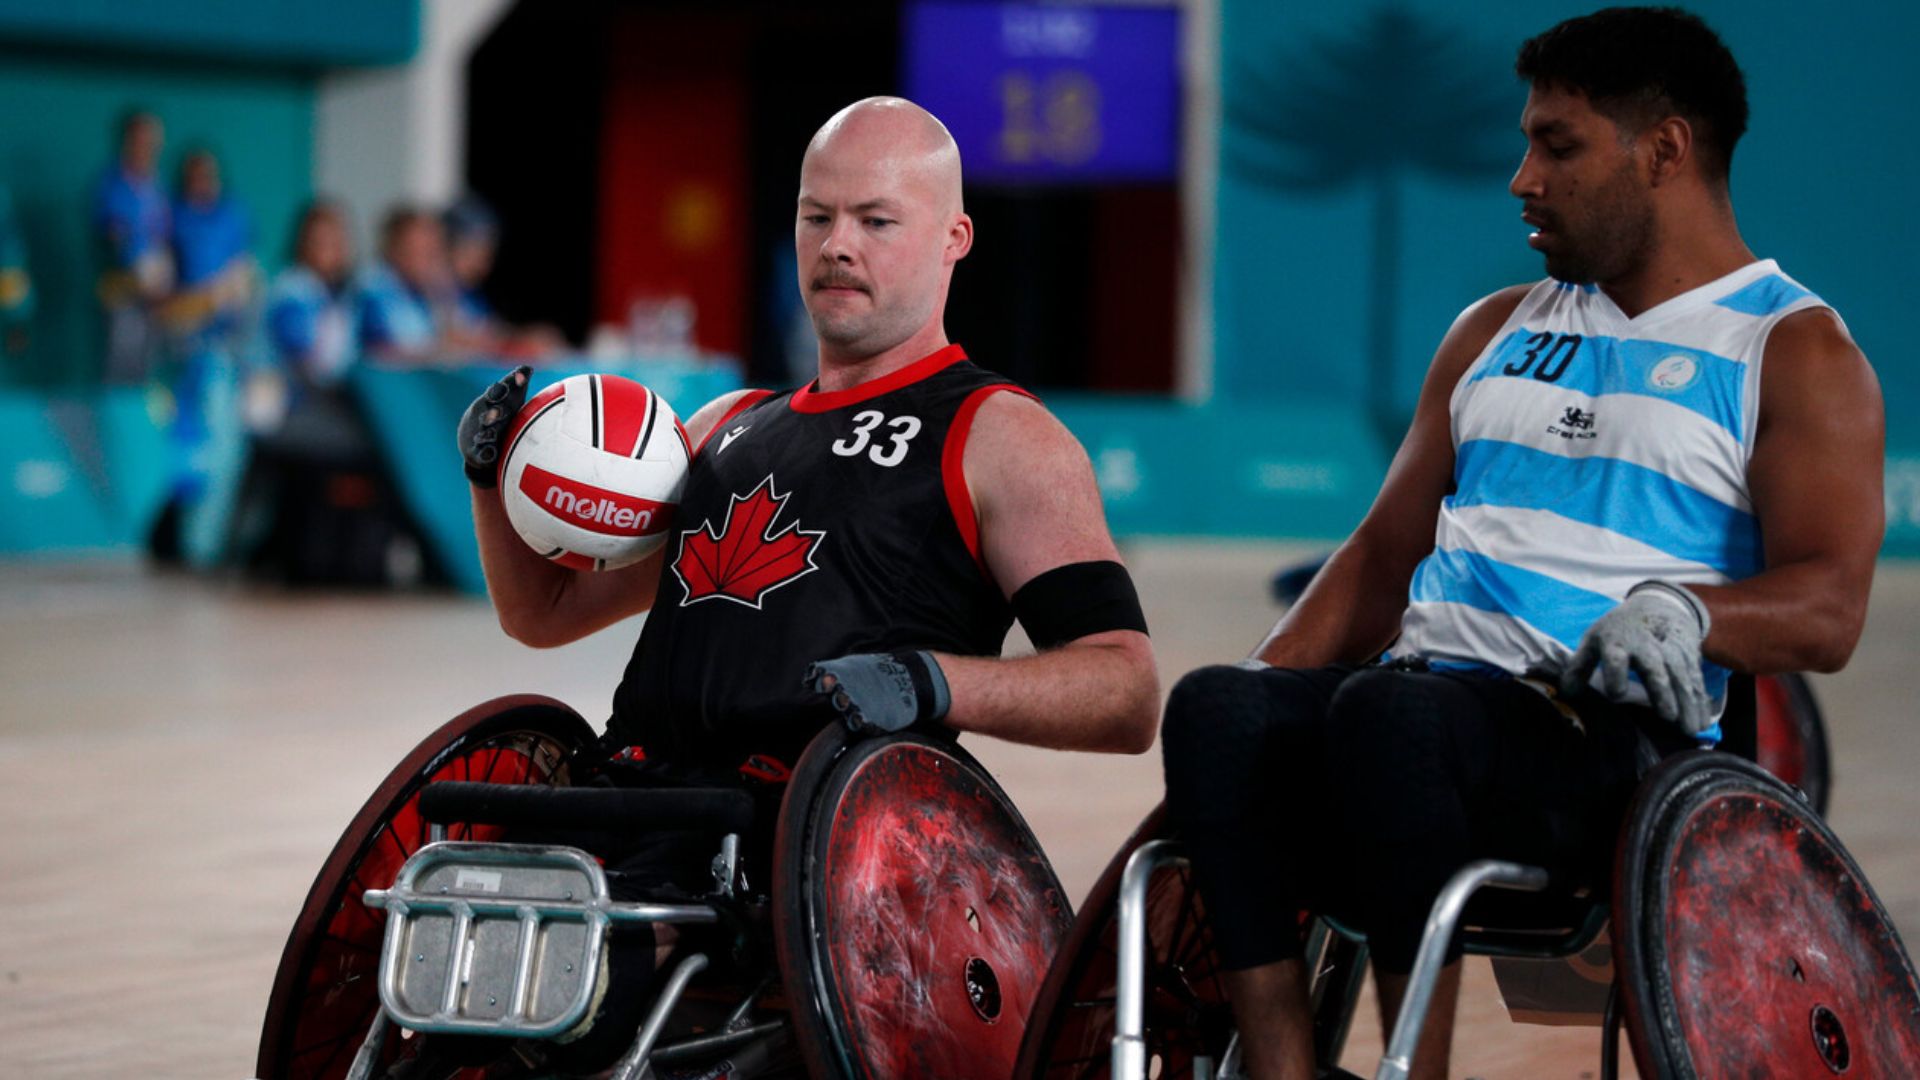 Wheelchair Rugby: Canada Debuts by Defeating Argentina with a High Score